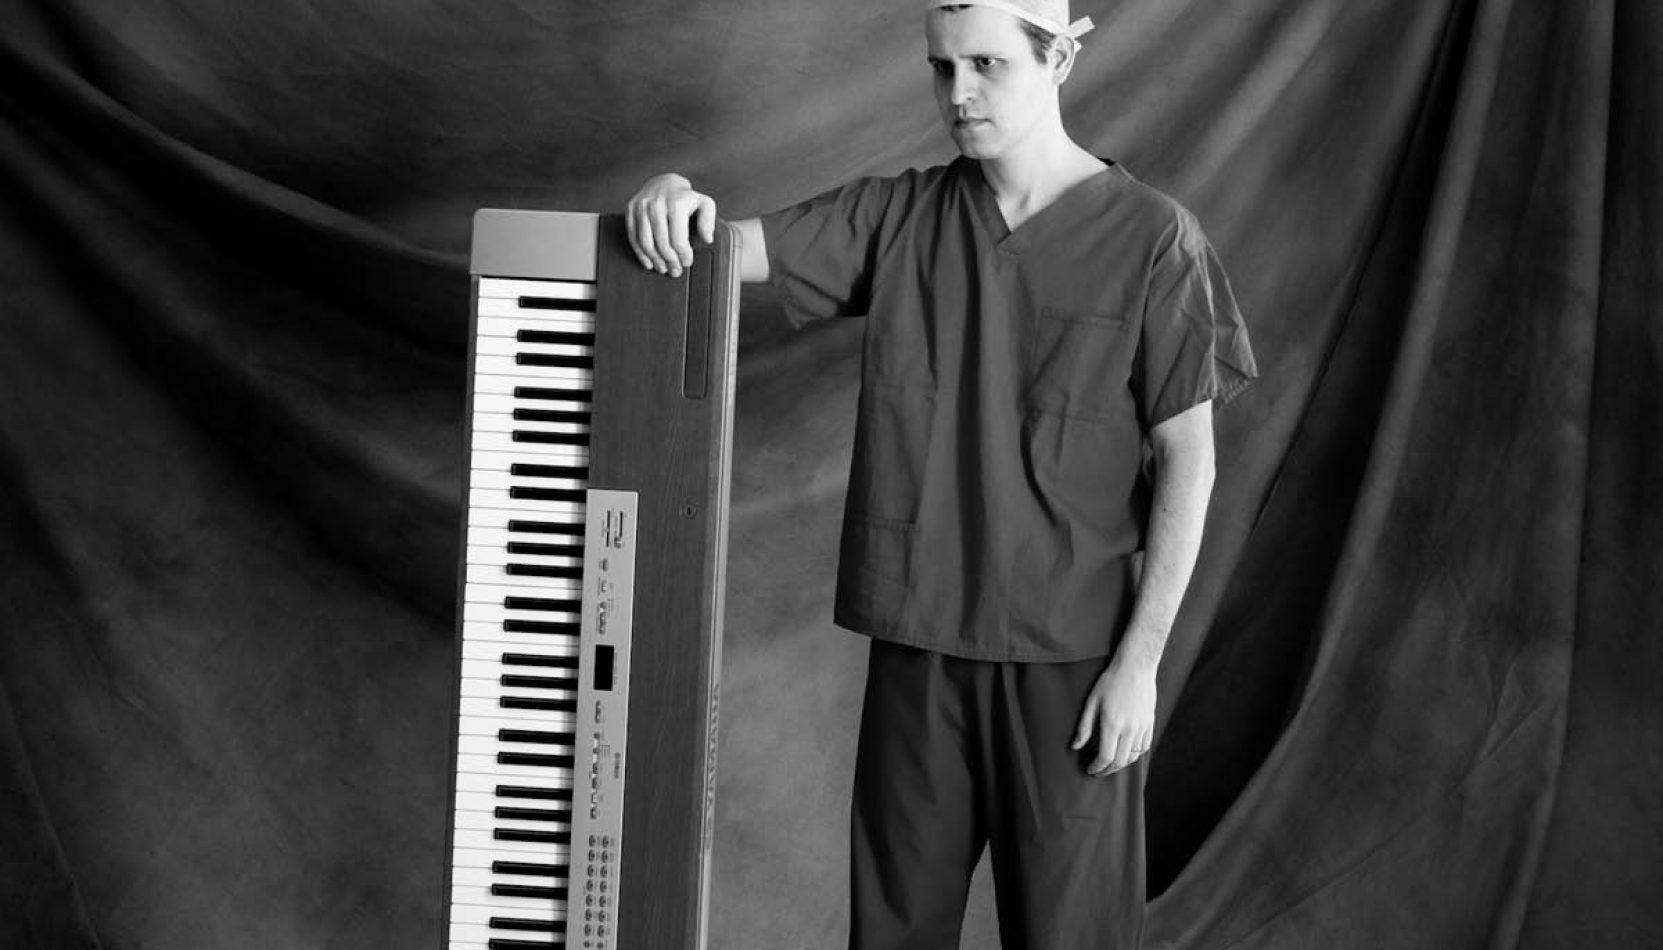 adam kay, this is going to hurt, junior doctor, comedian, comedy, stand-up comedy, g live, guildford, surrey, guide to guildford, guide to surrey, guide to entertainment, guide to whats on, whats on in surrey, things to do in surrey, things to do in guildford, nights out, whats on, guide to, guide, GuideTo, Surrey